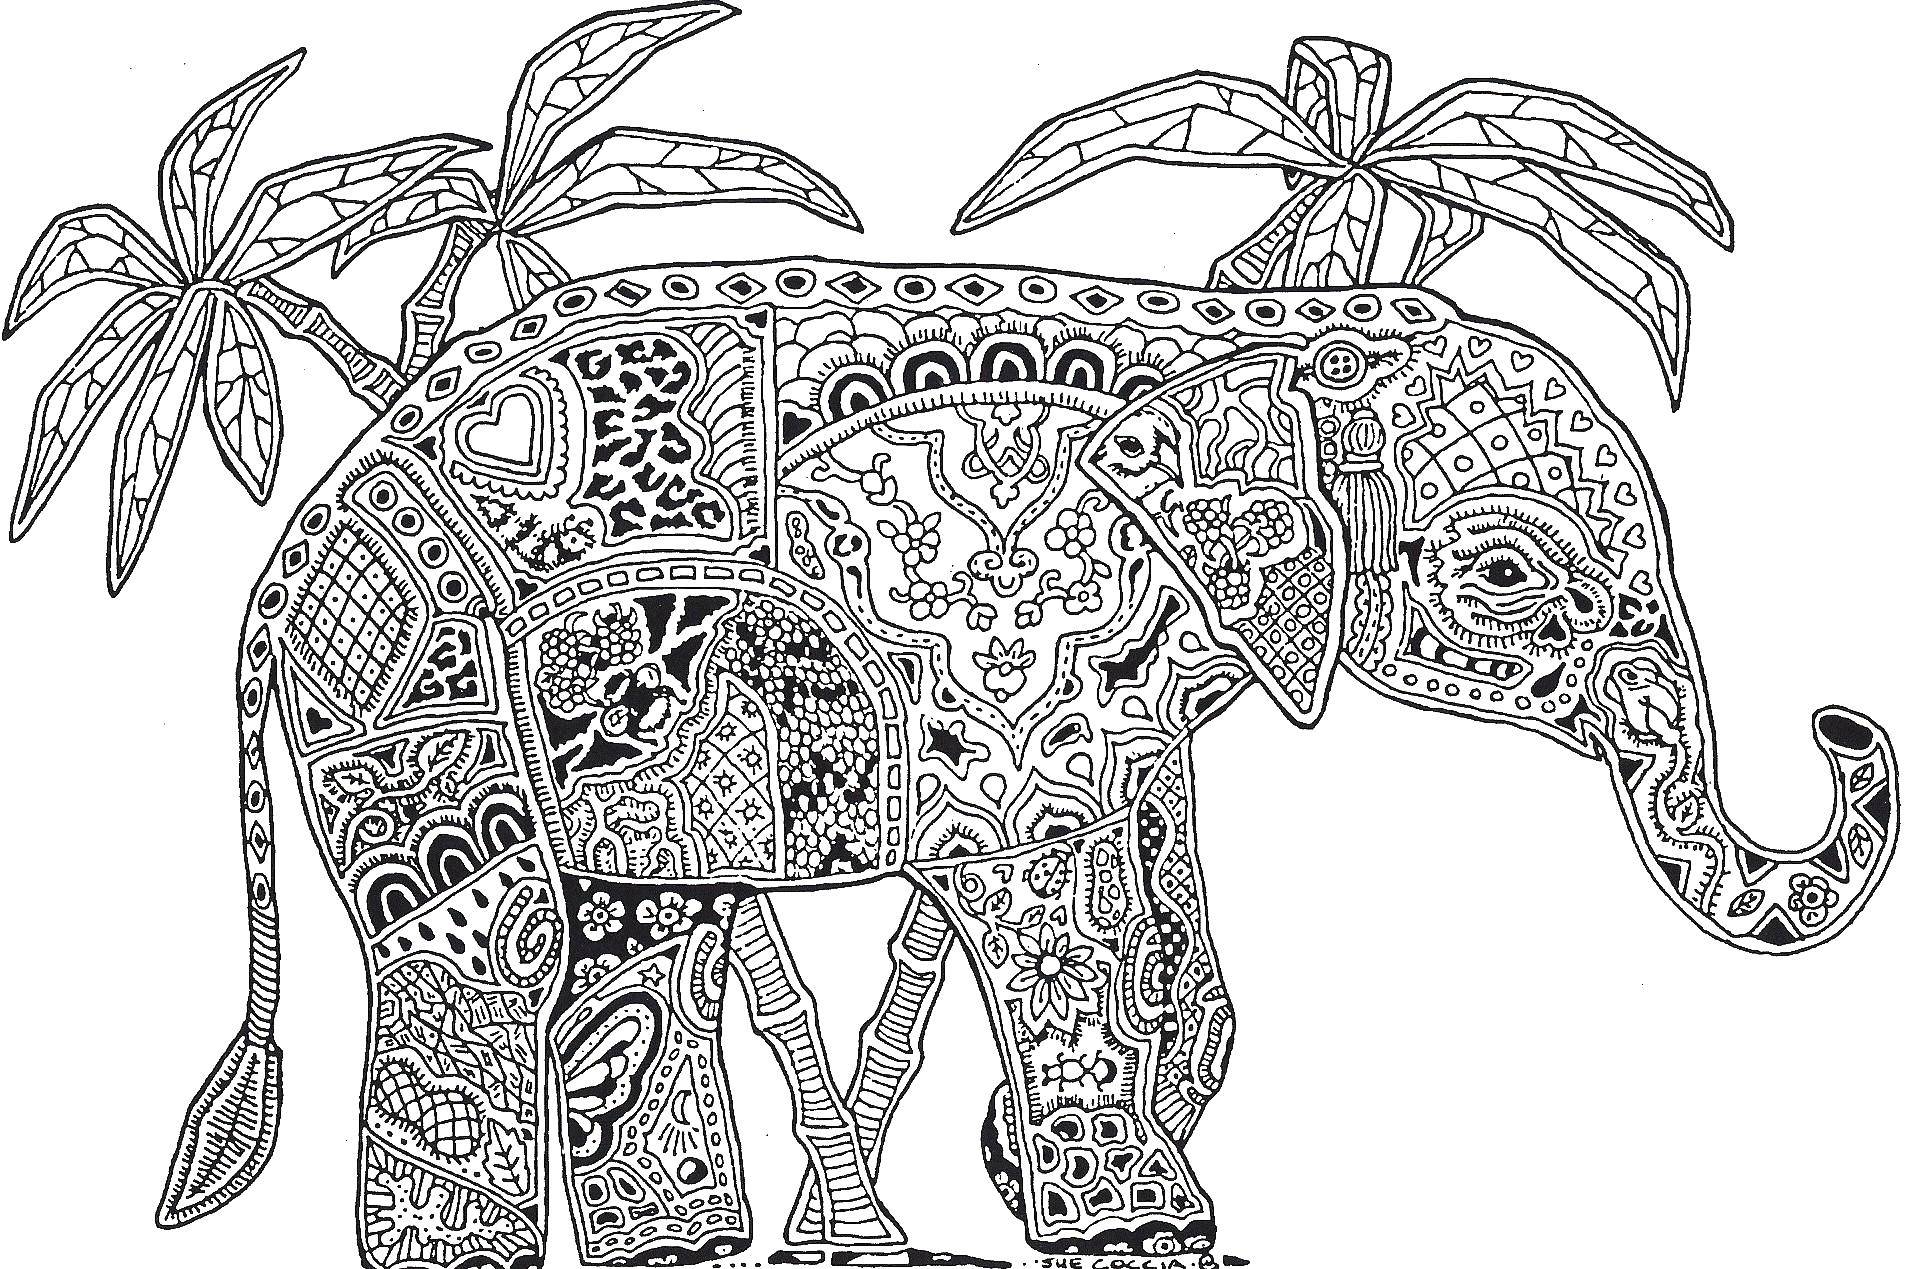 Coloring The elephant in the patterns. Category coloring. Tags:  the elephant, patterns, palm trees.